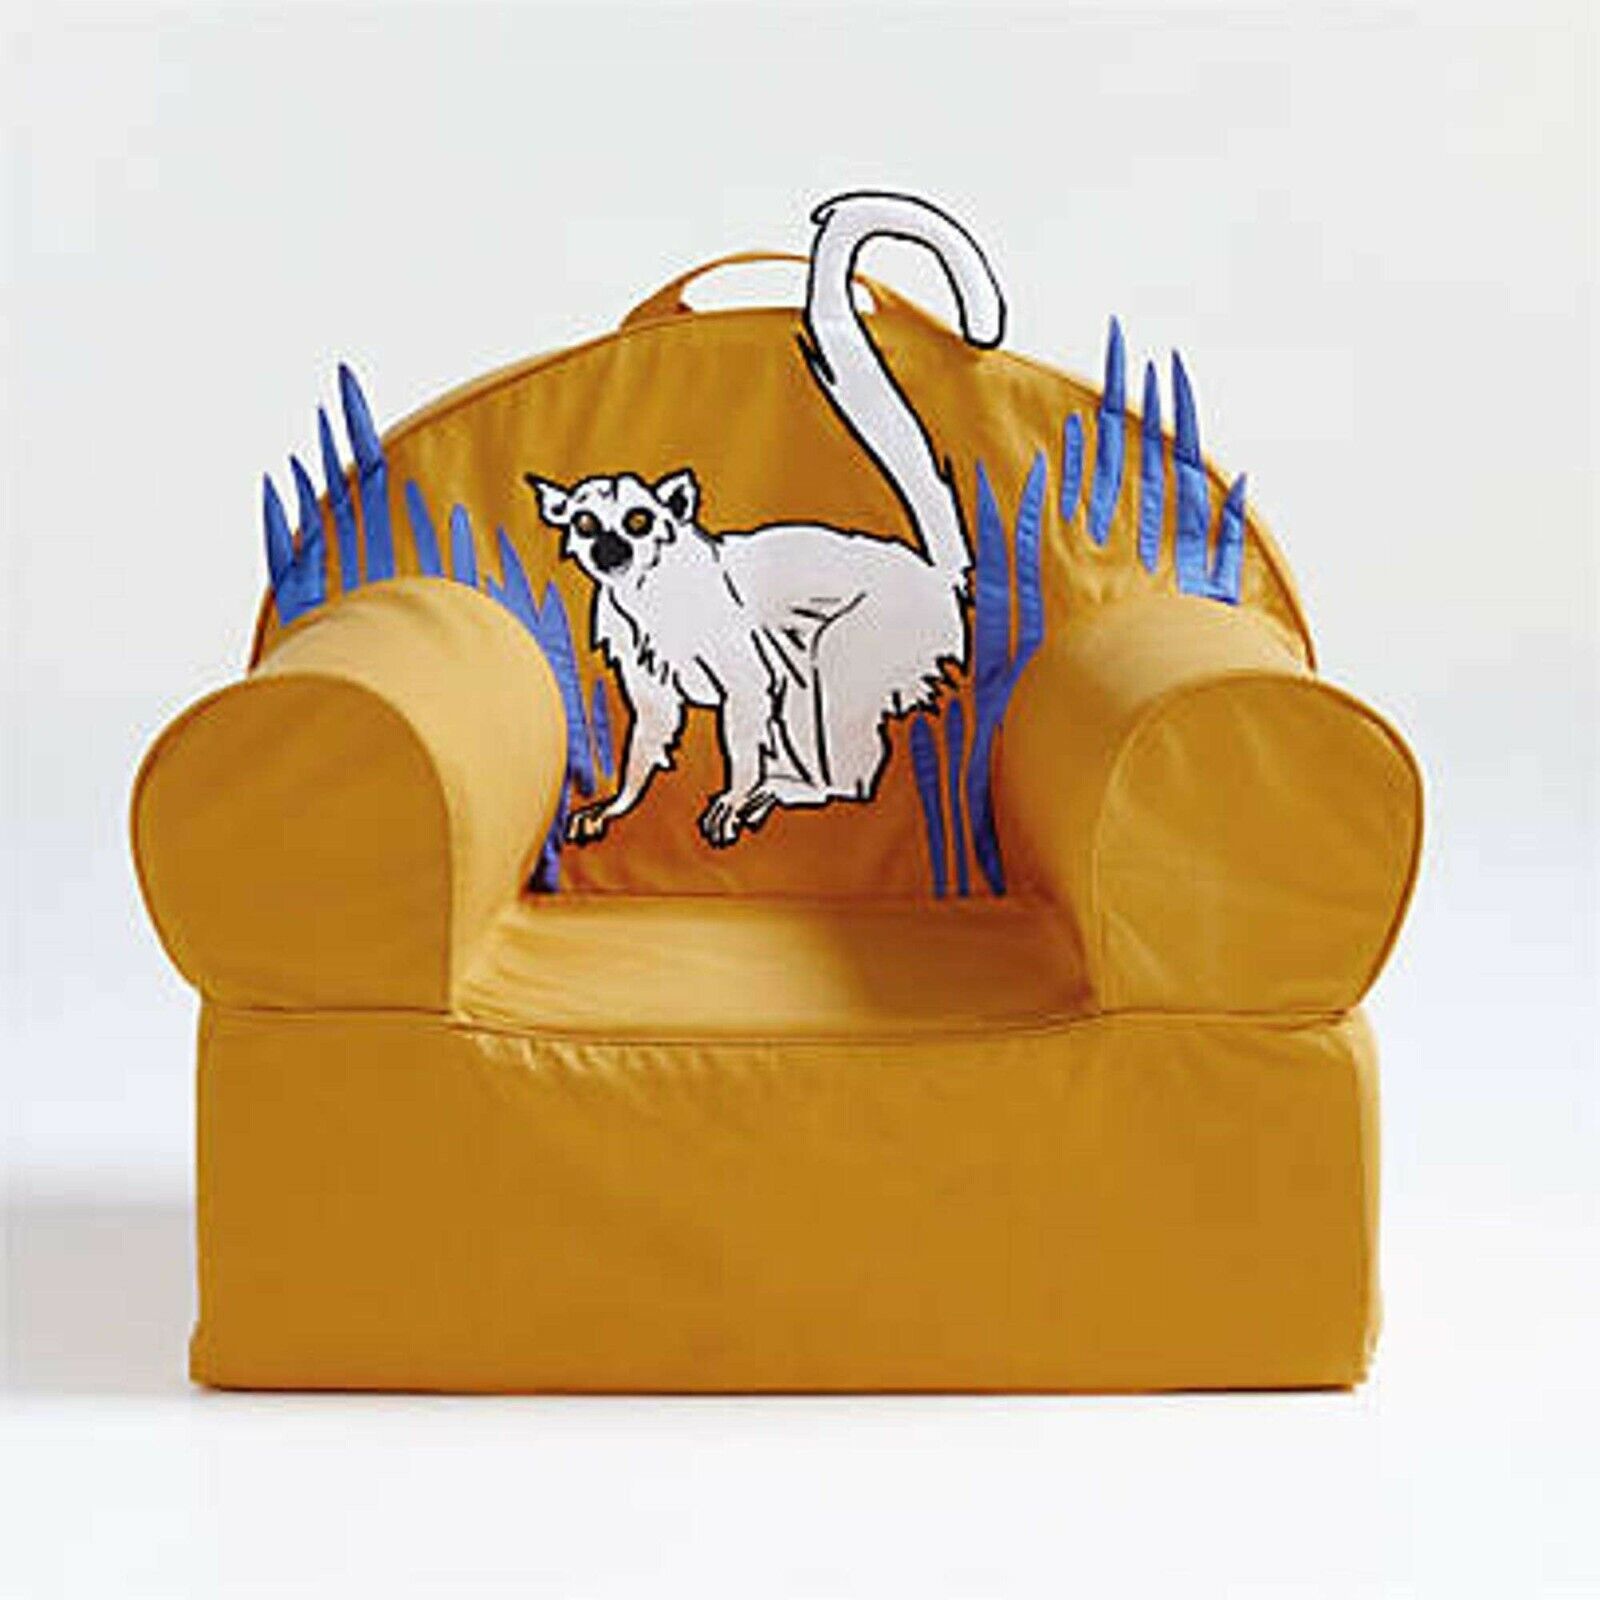 Crate & Barrel Lemur New mail order Large Nod Chair Cover NEW Collecti Goodall Jane